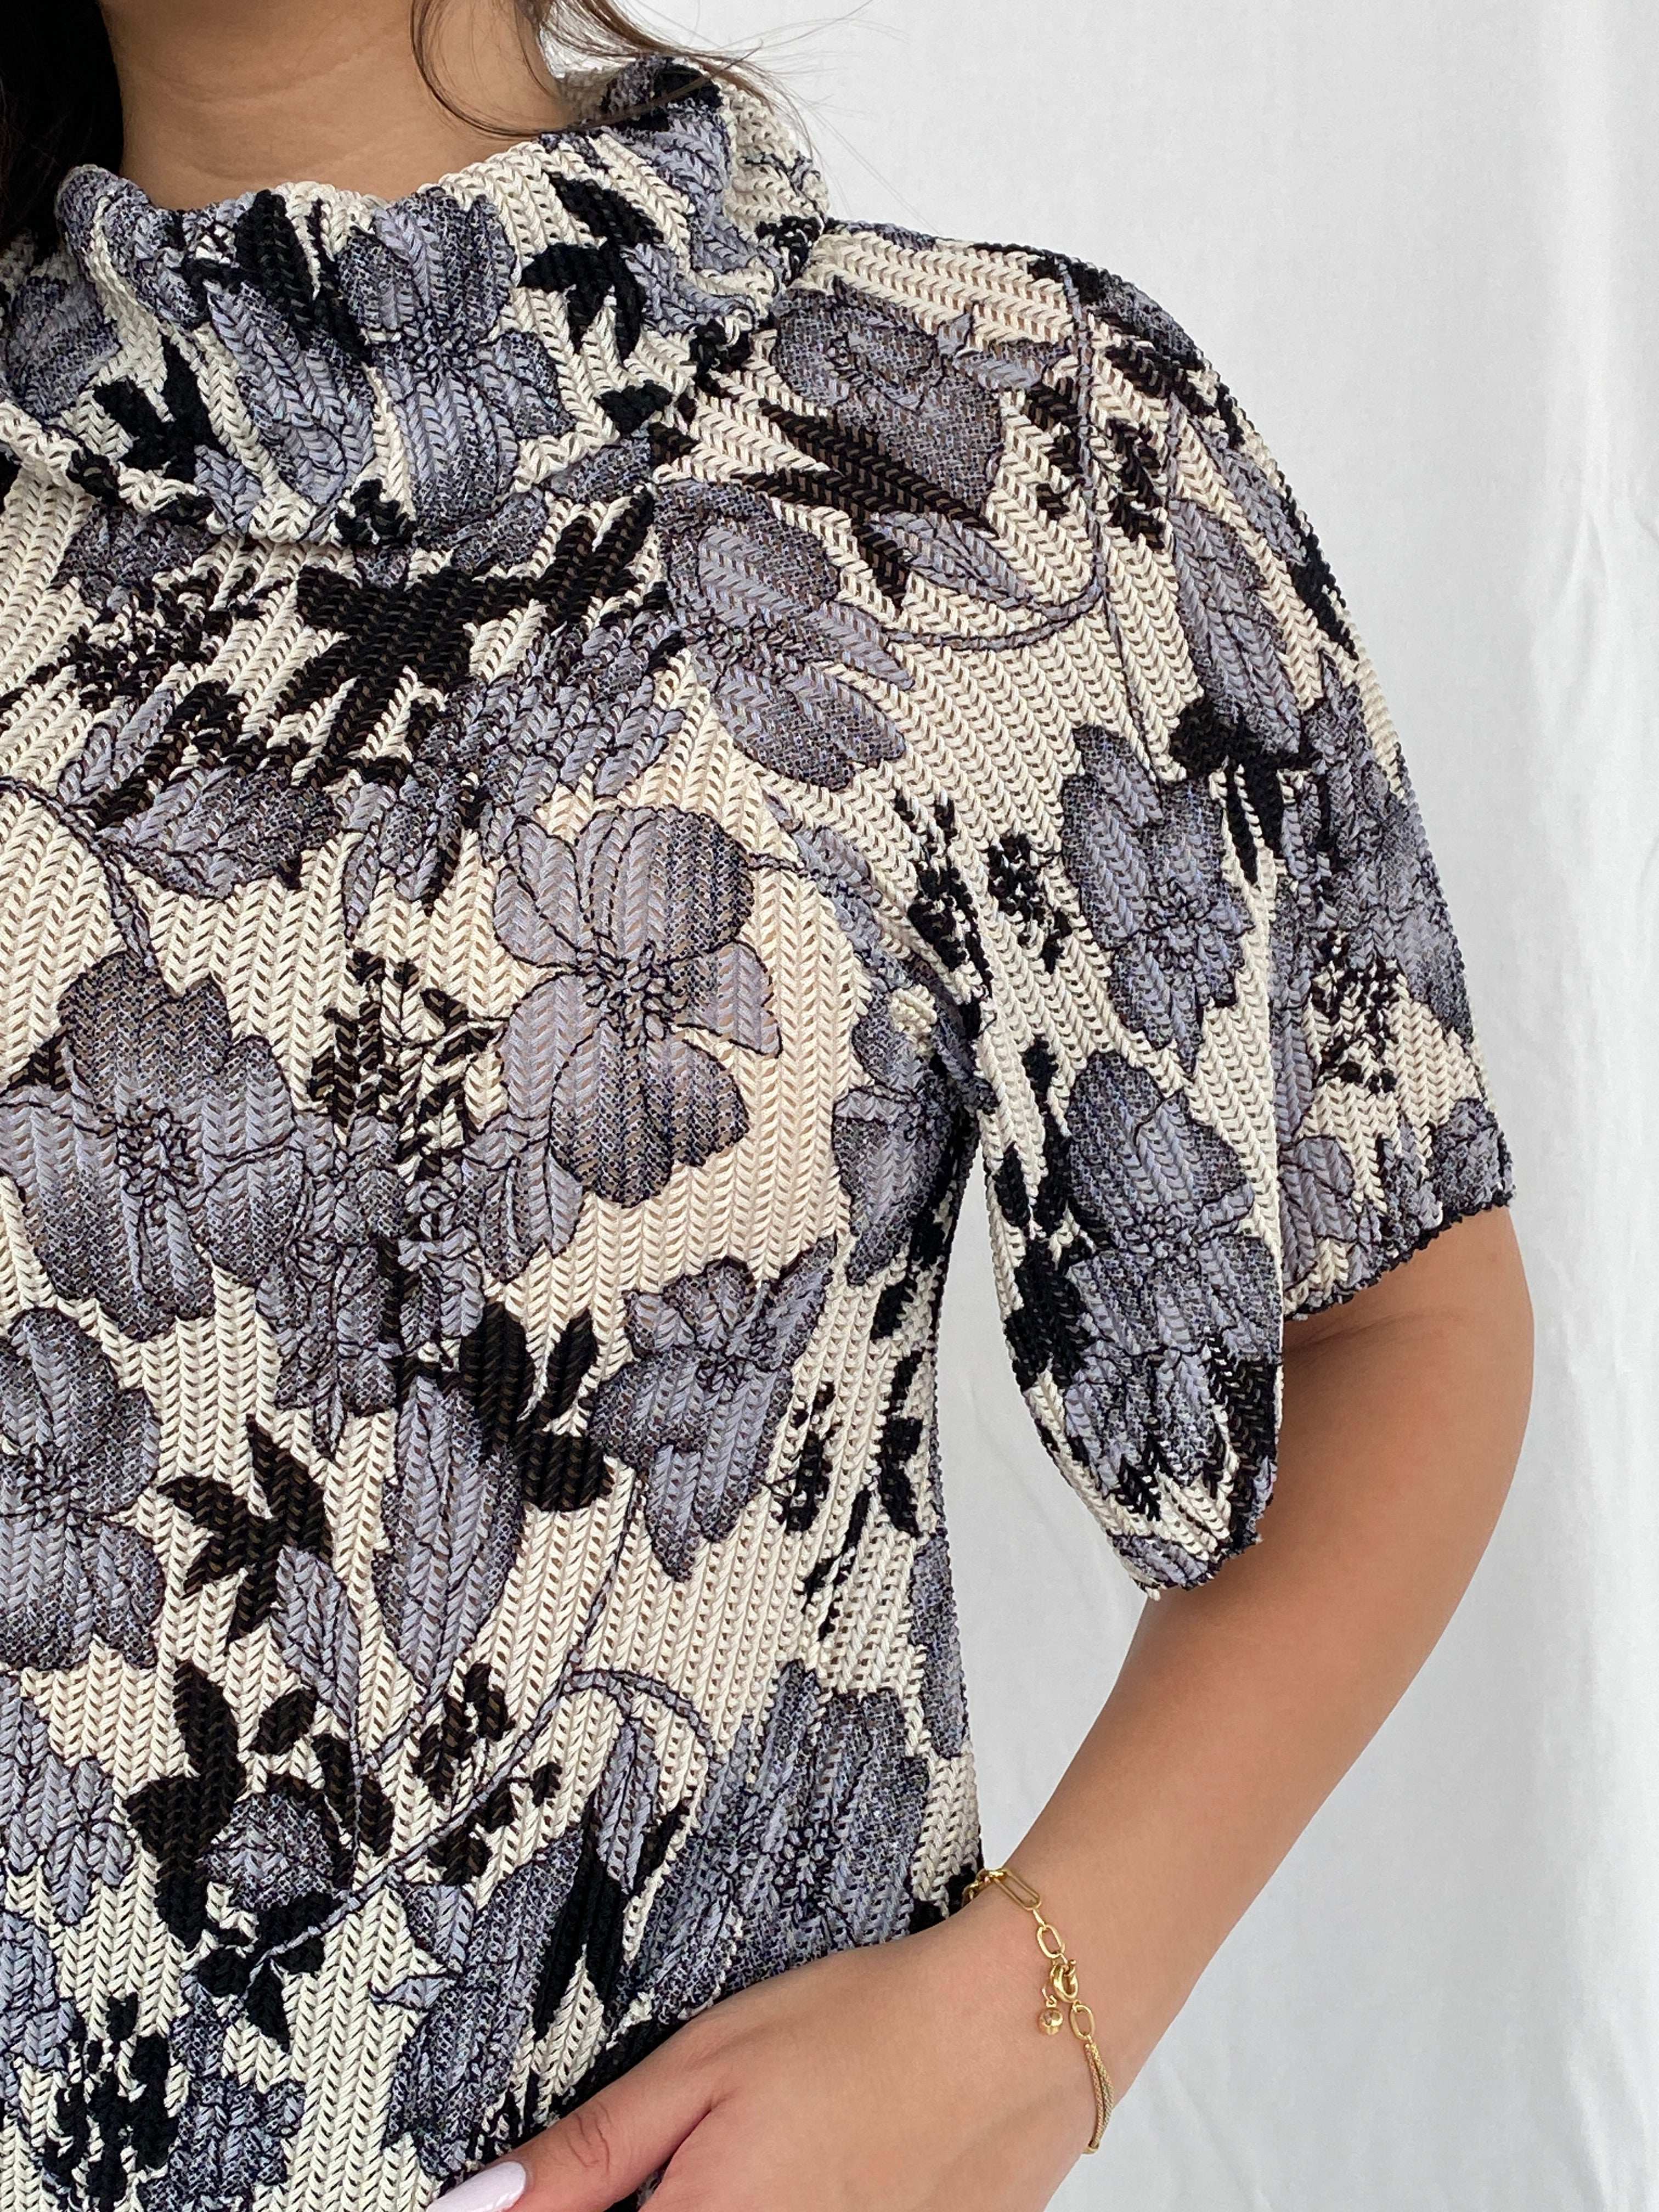 Beautiful Vintage Grey Floral Mesh Top with Open Back - Balagan Vintage Half Sleeve Top 00s, floral, floral mesh, floral top, NEW IN, Rama